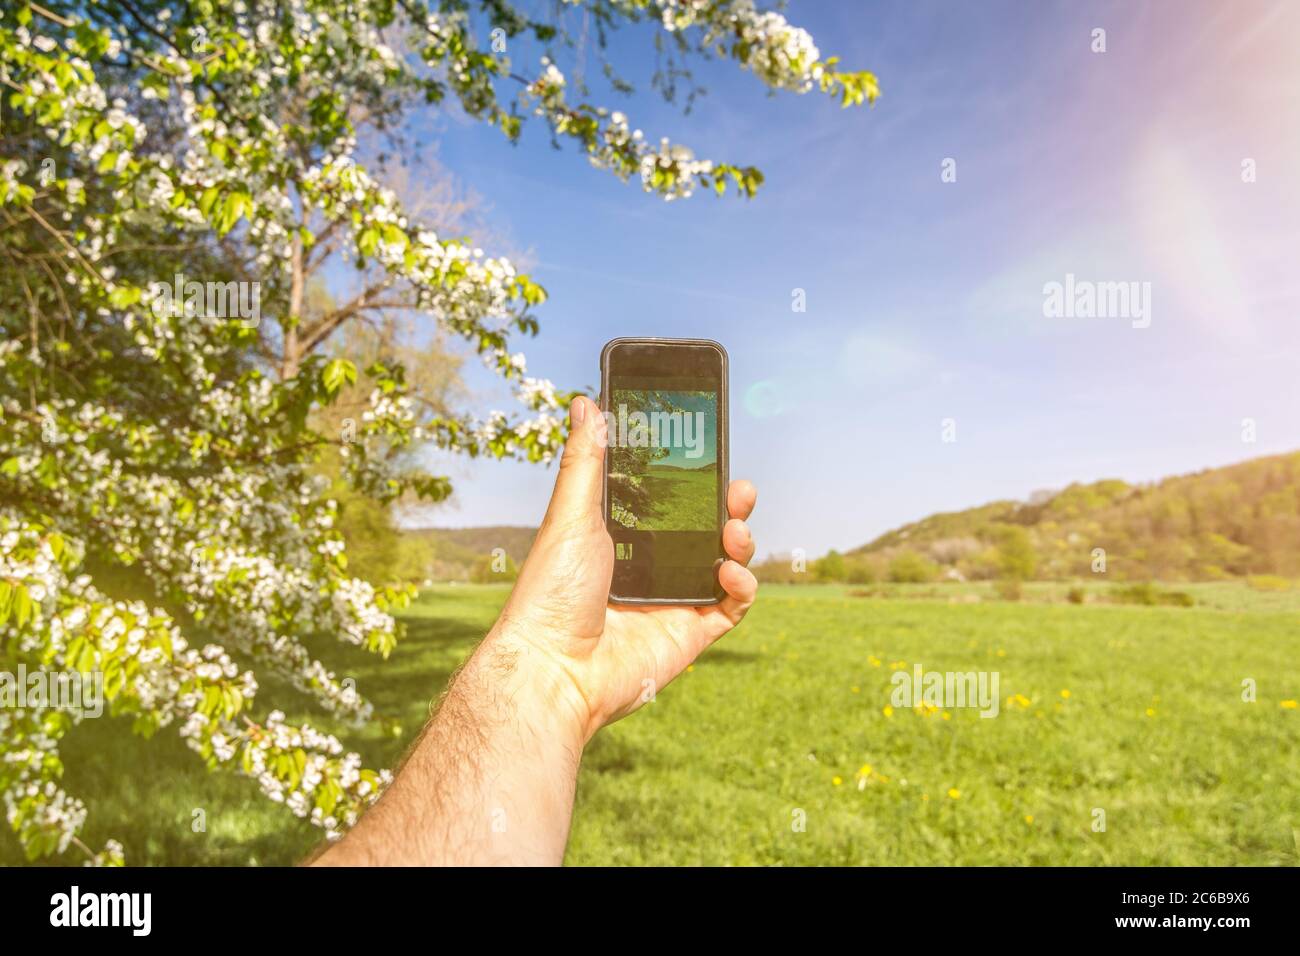 Taking a photo with a smartphone in rural landscape in spring Stock Photo